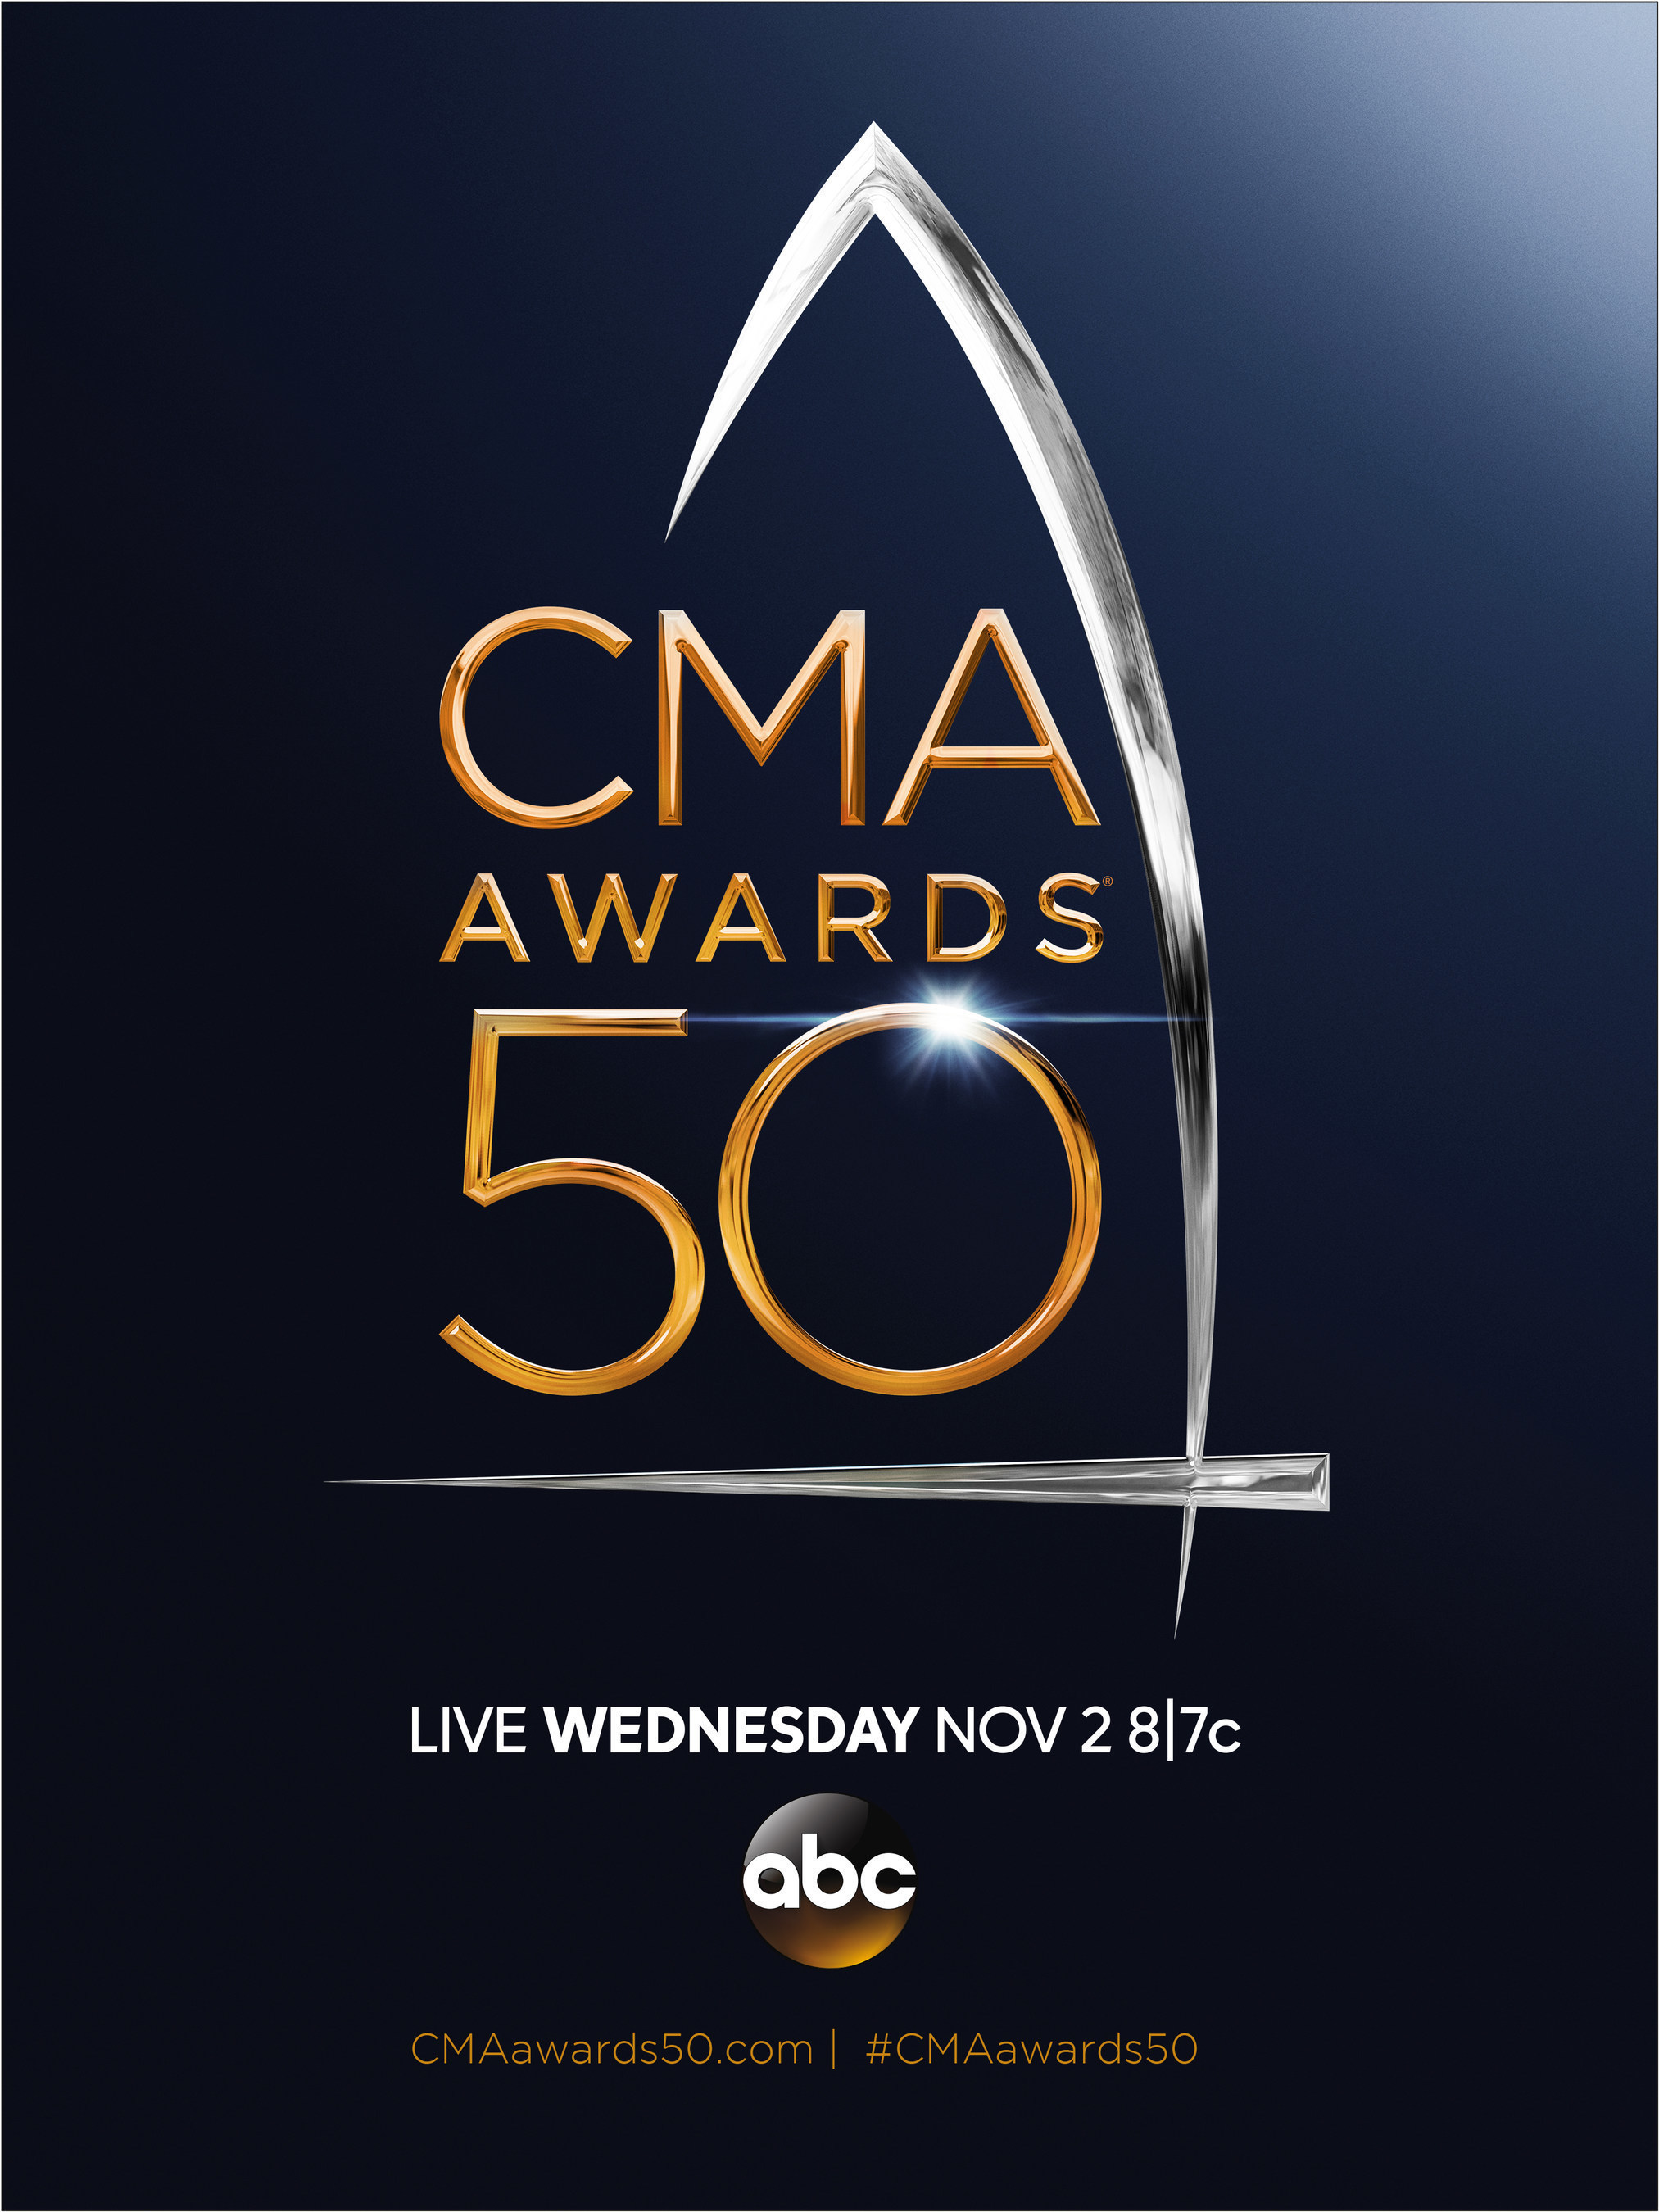 "The 50th Annual CMA Awards" will broadcast live from the Bridgestone Arena in Nashville Wednesday, Nov. 2 on the ABC Television Network. CREDIT: CMA